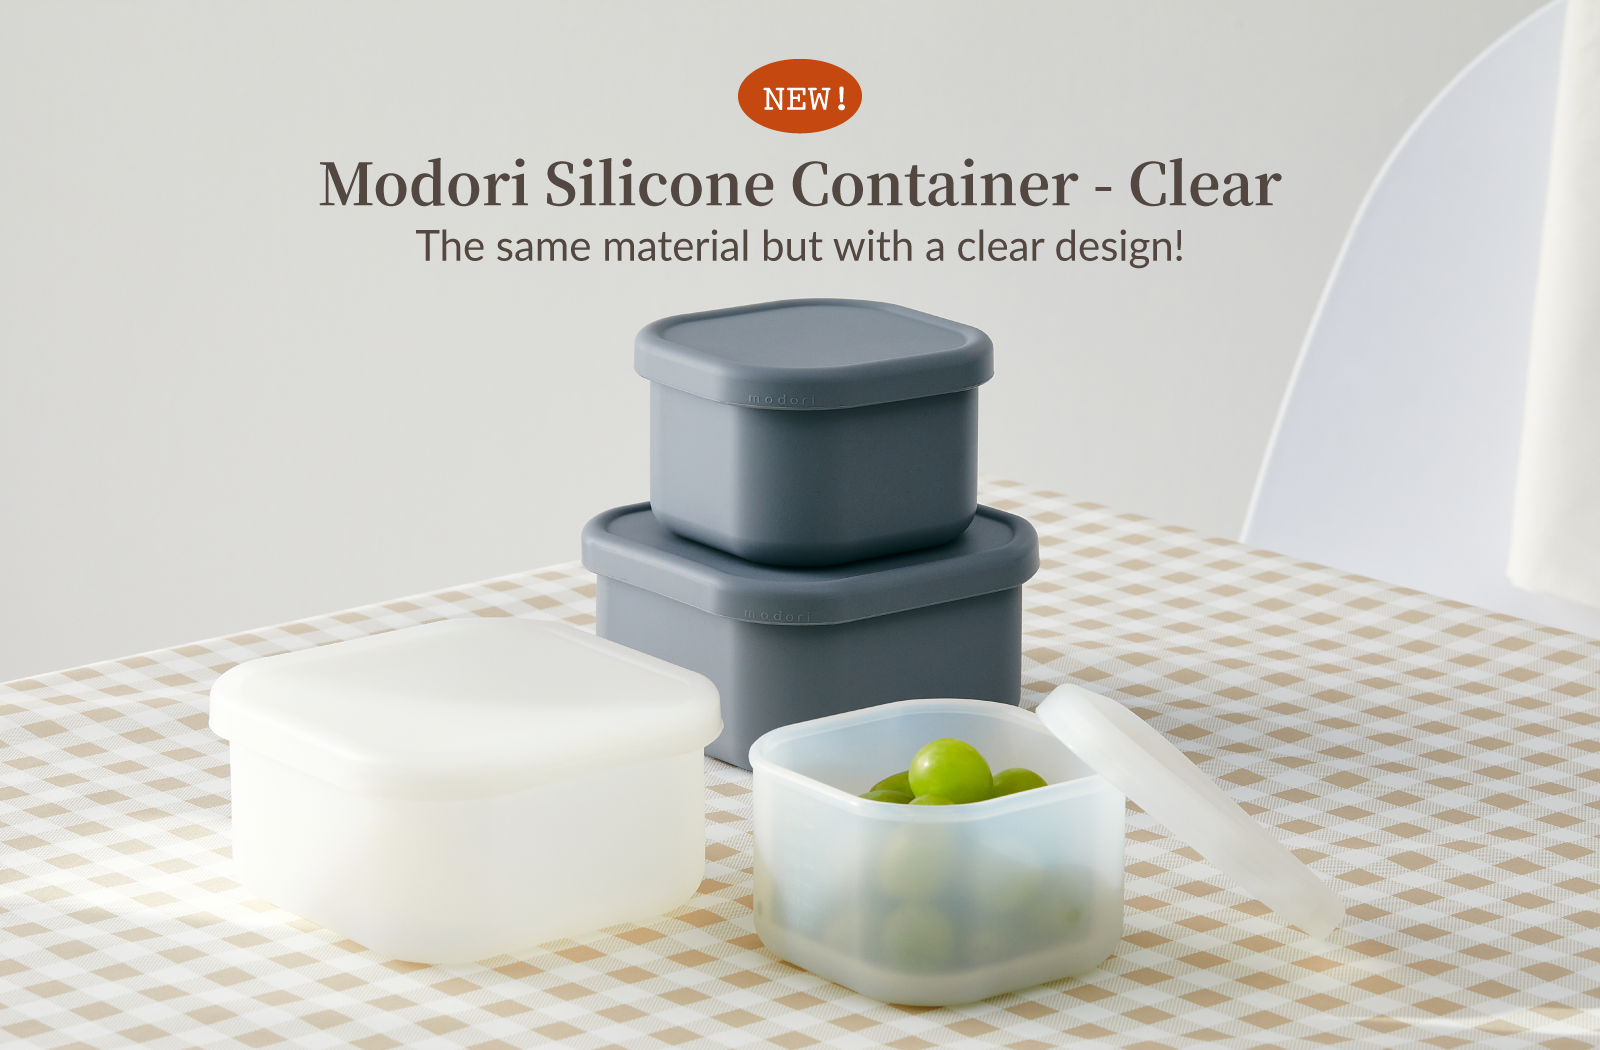 Modori silicone container - Designed to make meal preps easier -Food Storage Containers - Stackable - Space Saving - Microwaveable -Freezer, Dishwasher Safe - BPA Free silicone container - bento, lunch, food, plastic, rice boxes, containers